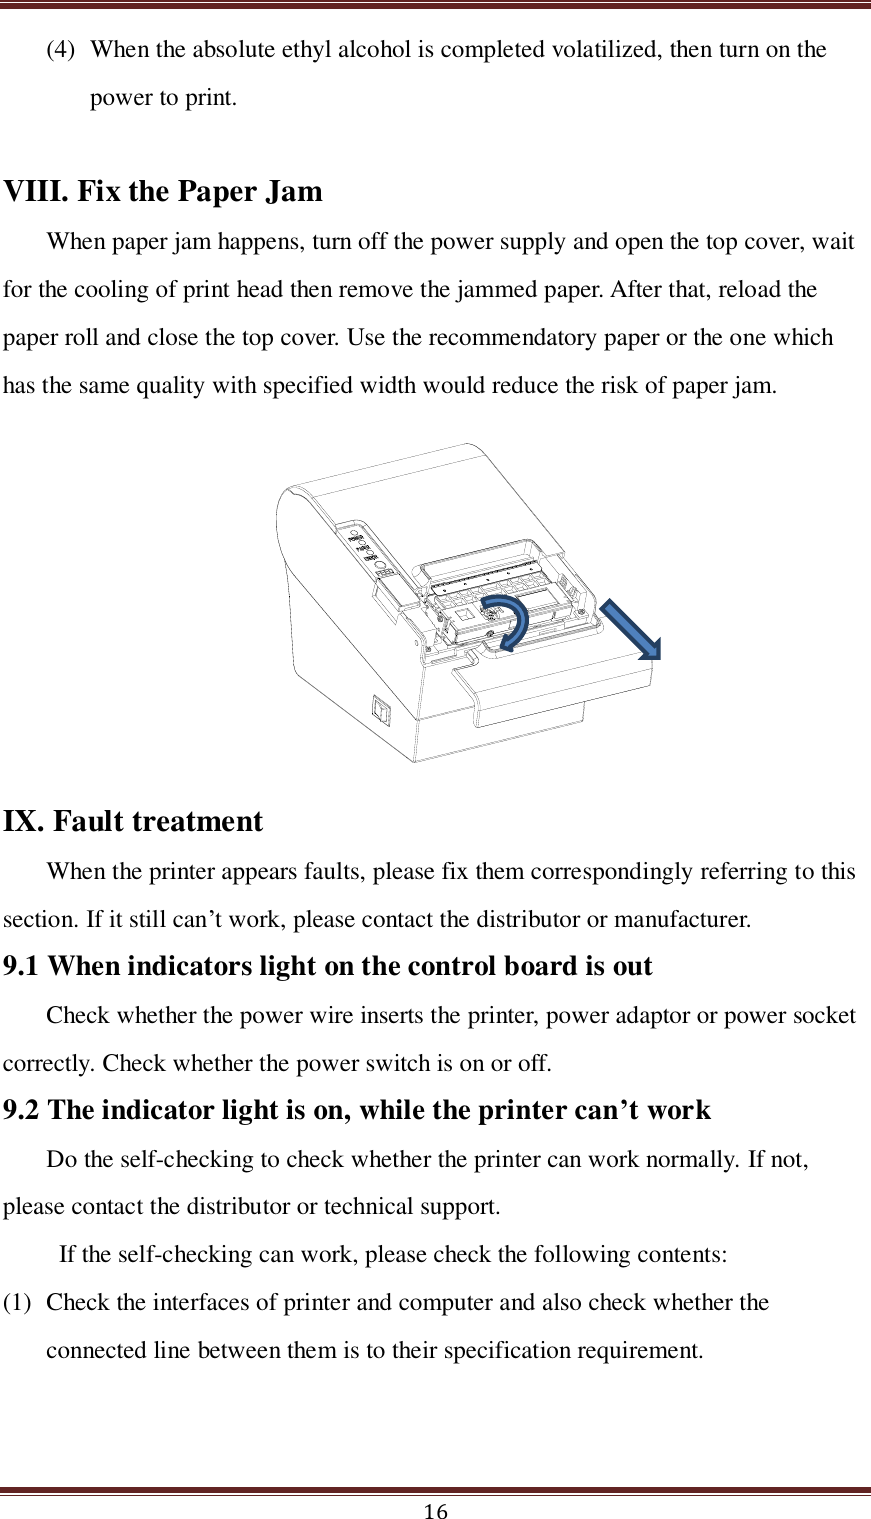  16 (4) When the absolute ethyl alcohol is completed volatilized, then turn on the power to print.    VIII. Fix the Paper Jam When paper jam happens, turn off the power supply and open the top cover, wait for the cooling of print head then remove the jammed paper. After that, reload the paper roll and close the top cover. Use the recommendatory paper or the one which has the same quality with specified width would reduce the risk of paper jam.  IX. Fault treatment When the printer appears faults, please fix them correspondingly referring to this section. If it still can’t work, please contact the distributor or manufacturer. 9.1 When indicators light on the control board is out Check whether the power wire inserts the printer, power adaptor or power socket correctly. Check whether the power switch is on or off.   9.2 The indicator light is on, while the printer can’t work Do the self-checking to check whether the printer can work normally. If not, please contact the distributor or technical support.   If the self-checking can work, please check the following contents: (1) Check the interfaces of printer and computer and also check whether the connected line between them is to their specification requirement.   